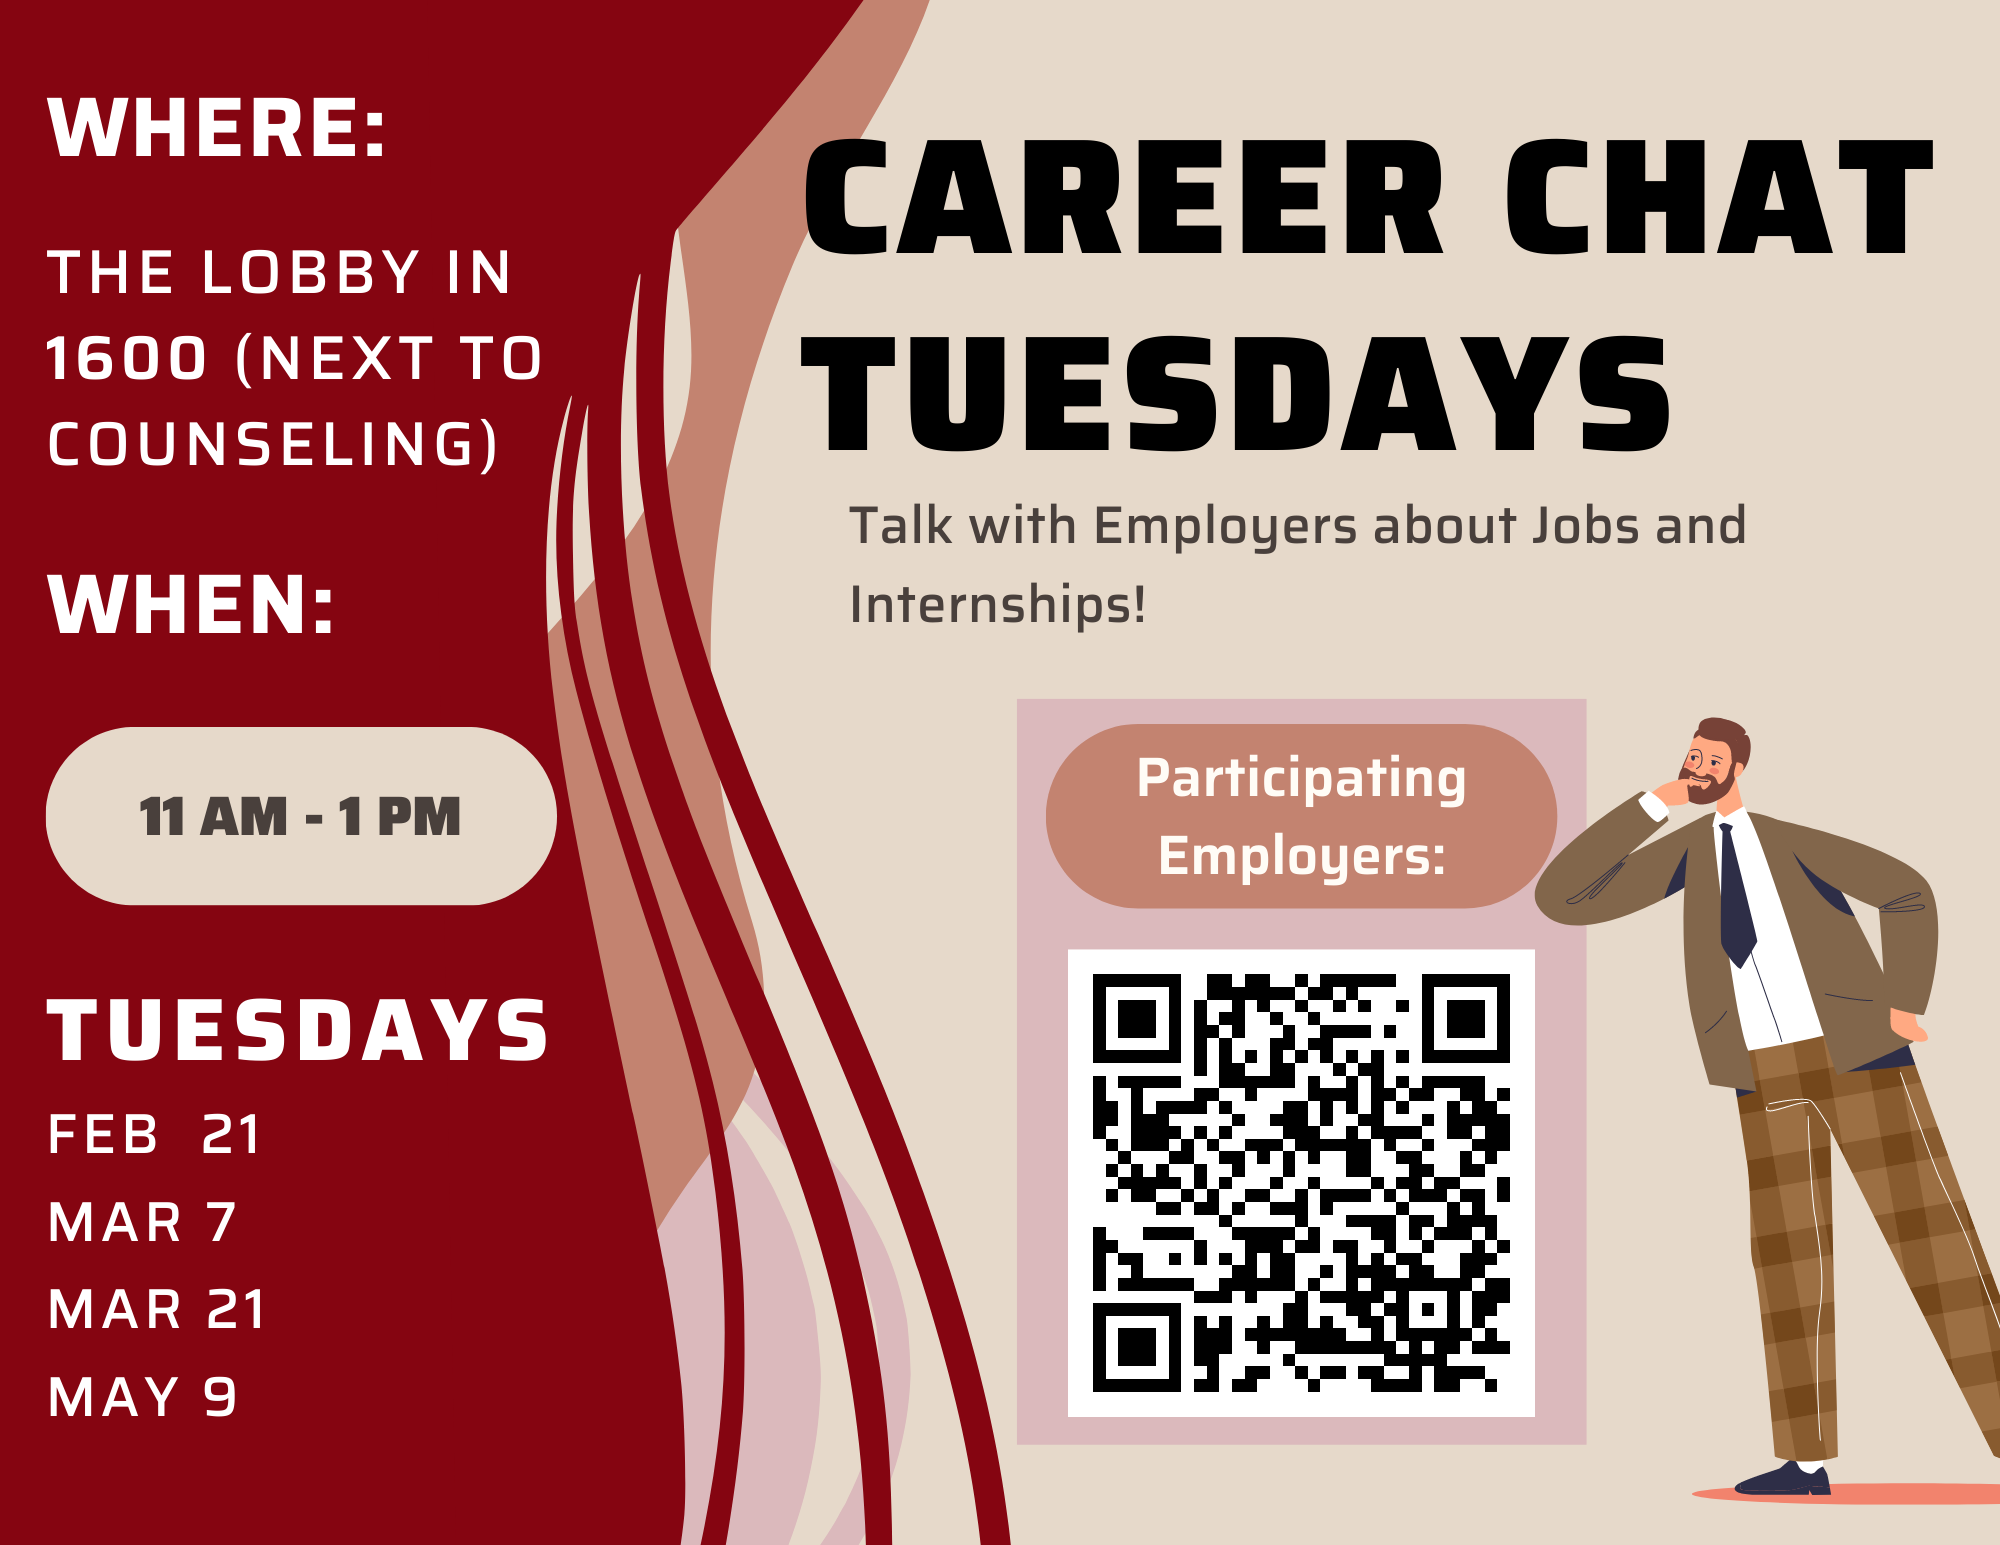 Career Chat Tuesdays, 11:00 - 1:00 in 1600 Lobby, Feb. 21, March 7, March 21, May 9, Talk with Employers about Jobs and Internships!